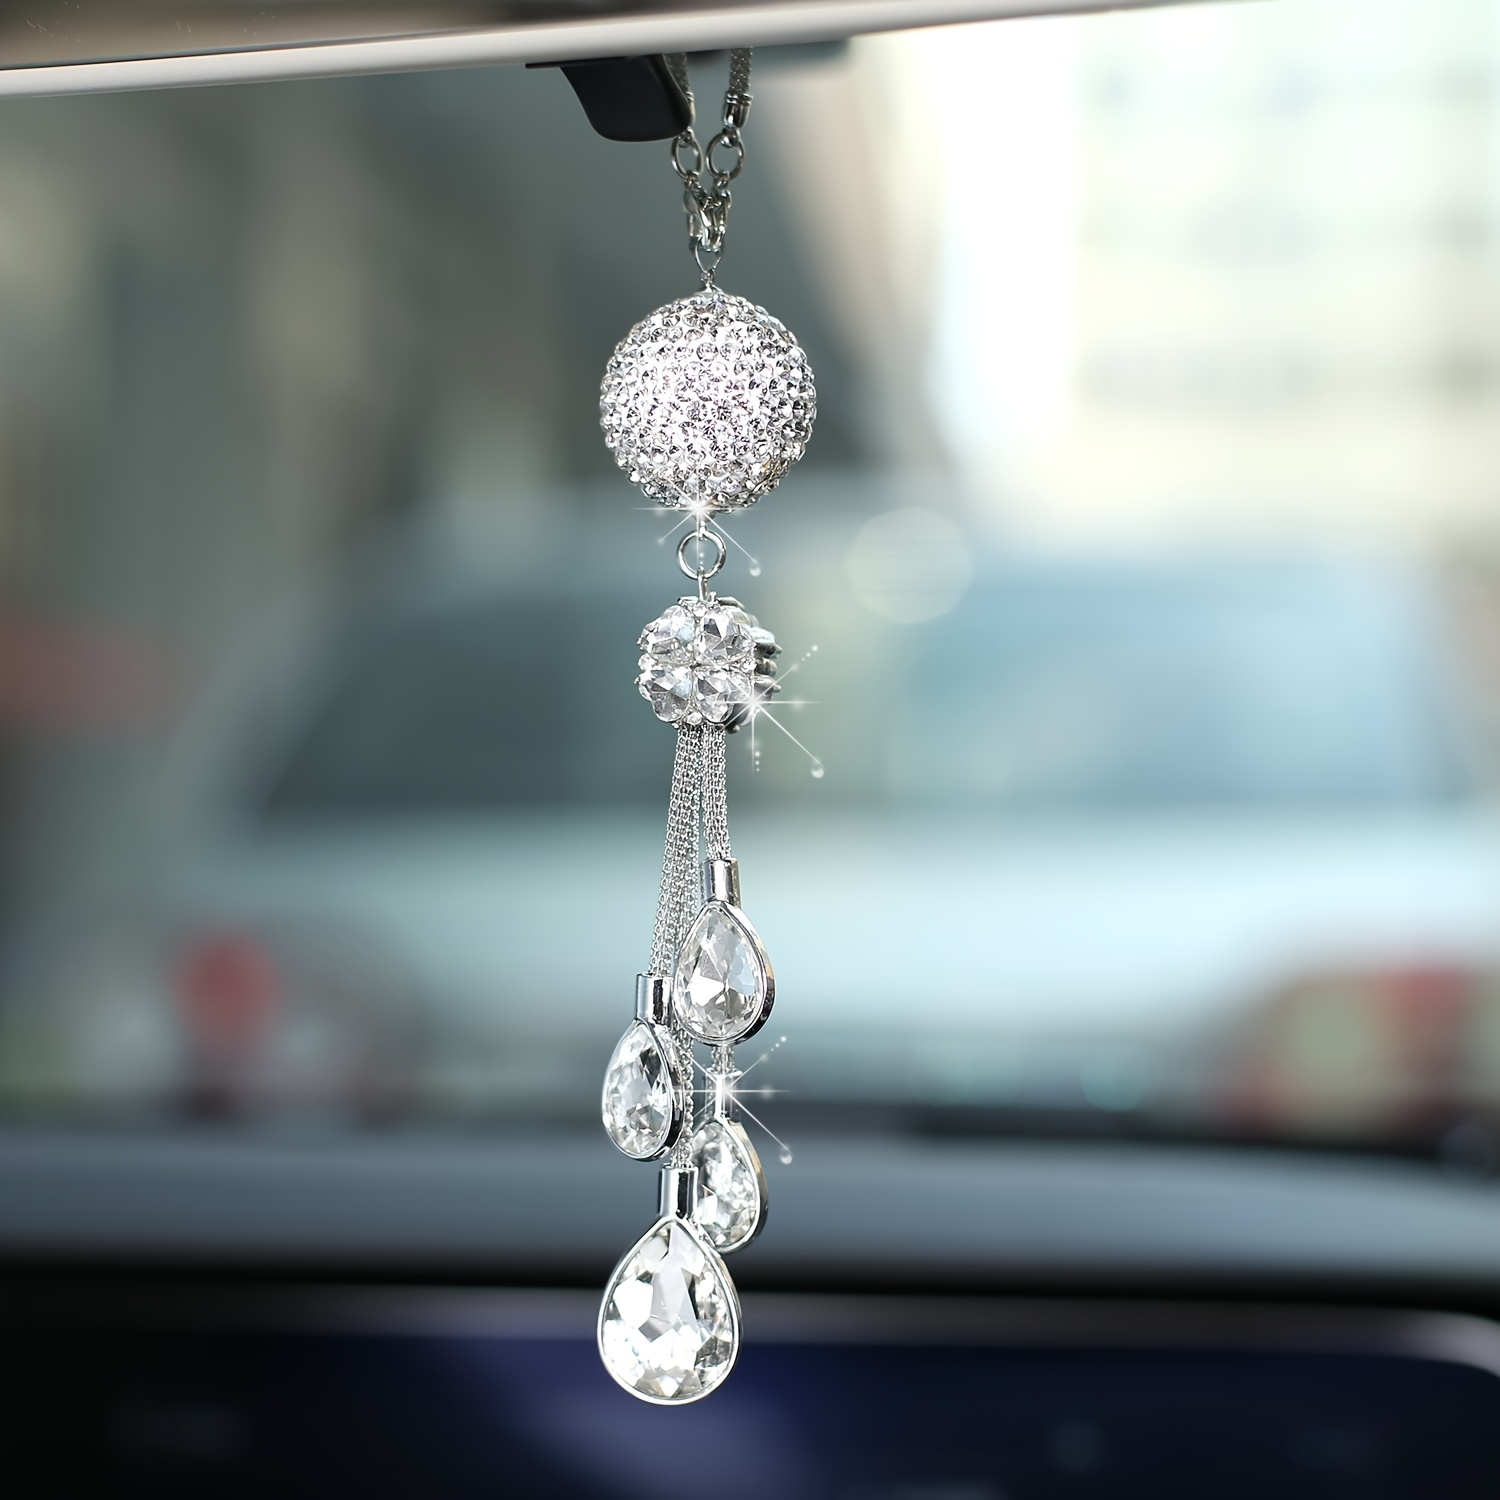 Car Pendant Bling Rear View Mirror Charm Hanging Ornament Decor Accessories  Gift